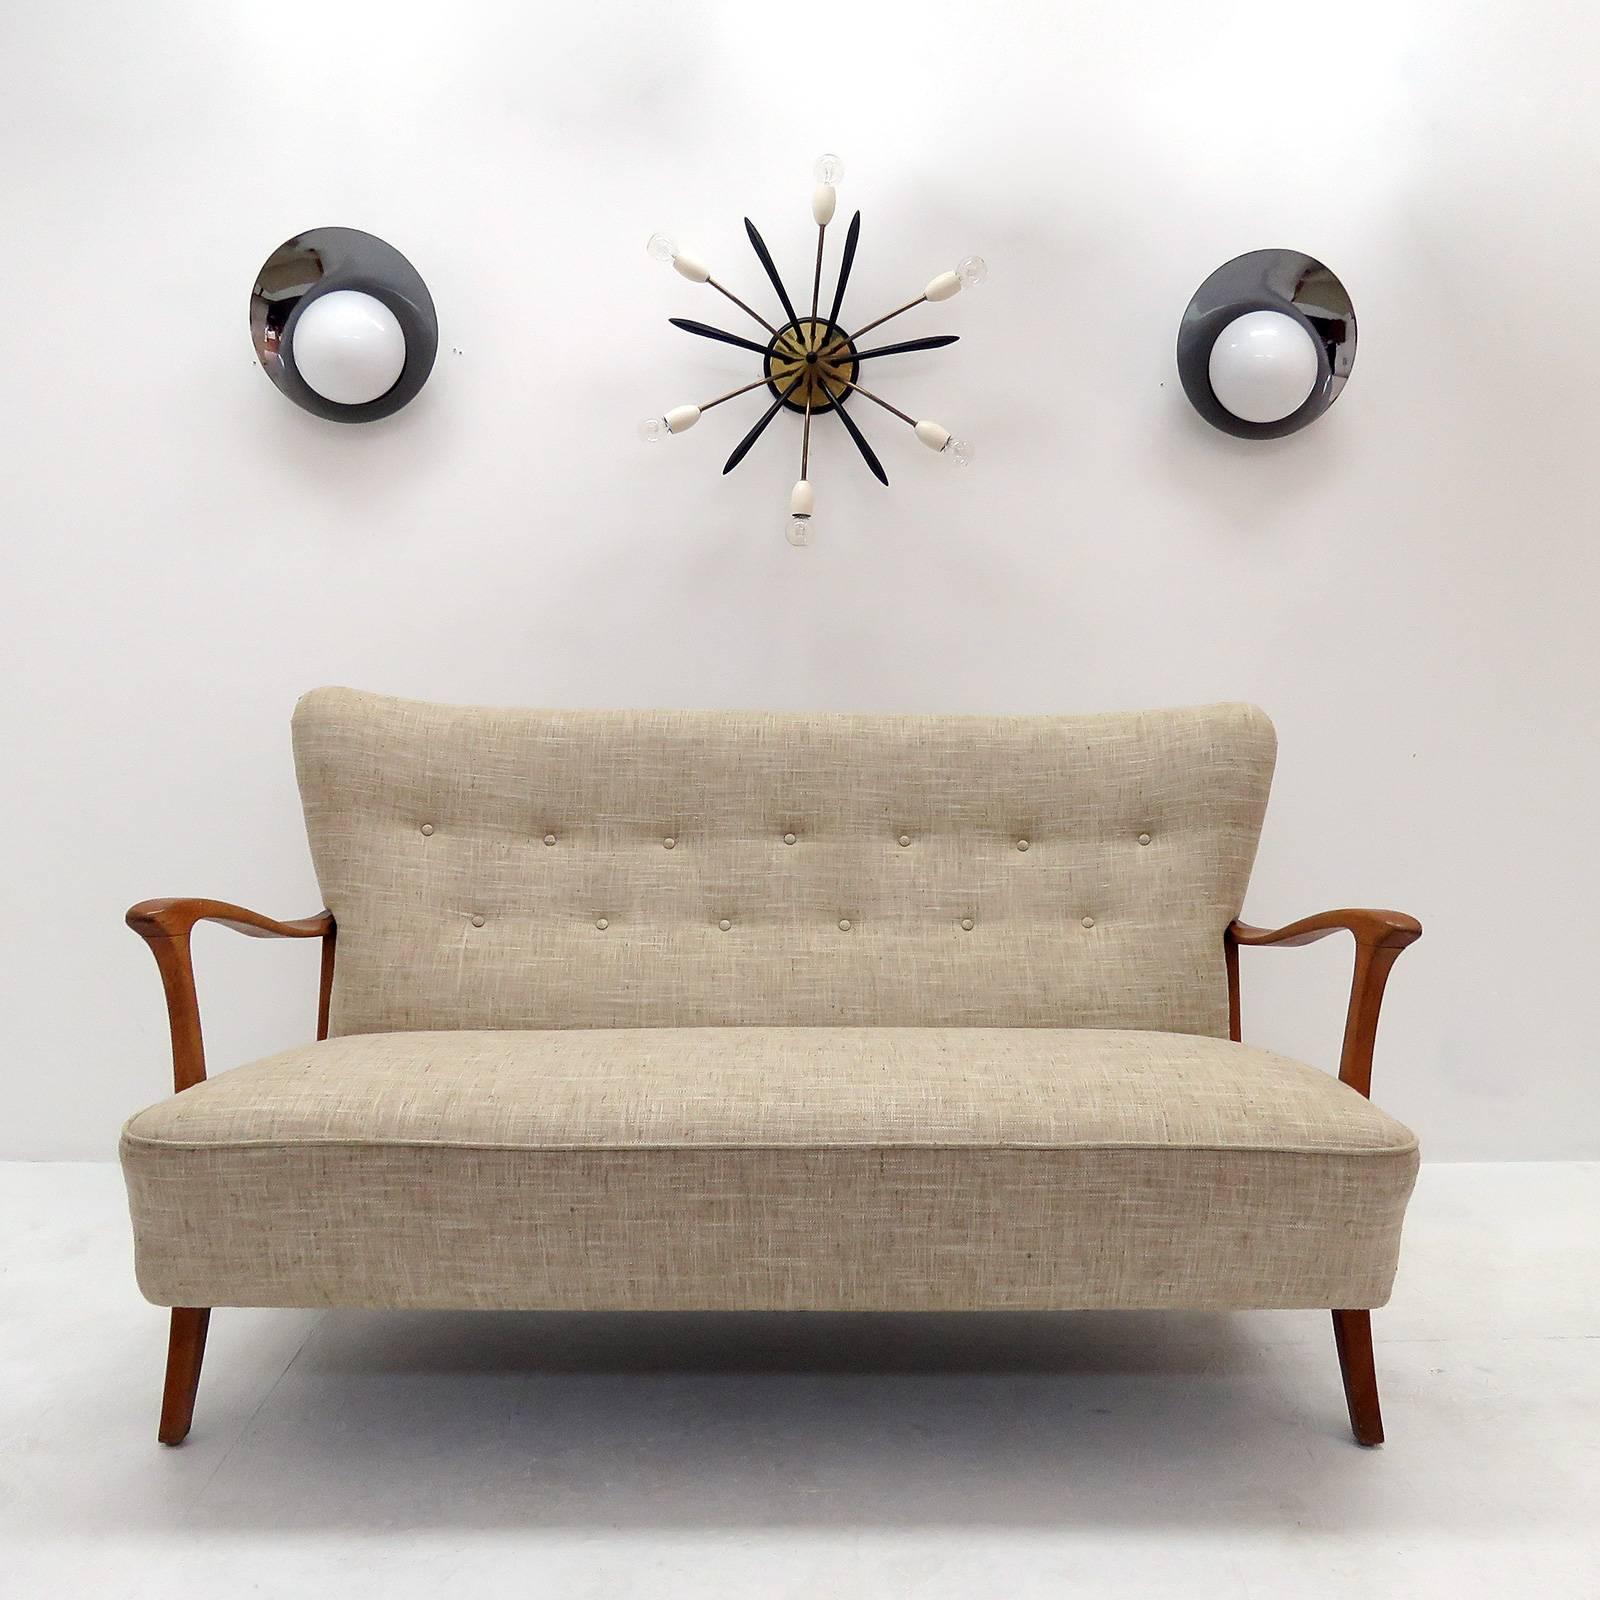 Wonderful three-seat Danish modern sofa in style of Frits Henningsen, patinaed sculptural beech frame with professionally reupholstered body, The concave wing back is tufted and the seat is spring supported.